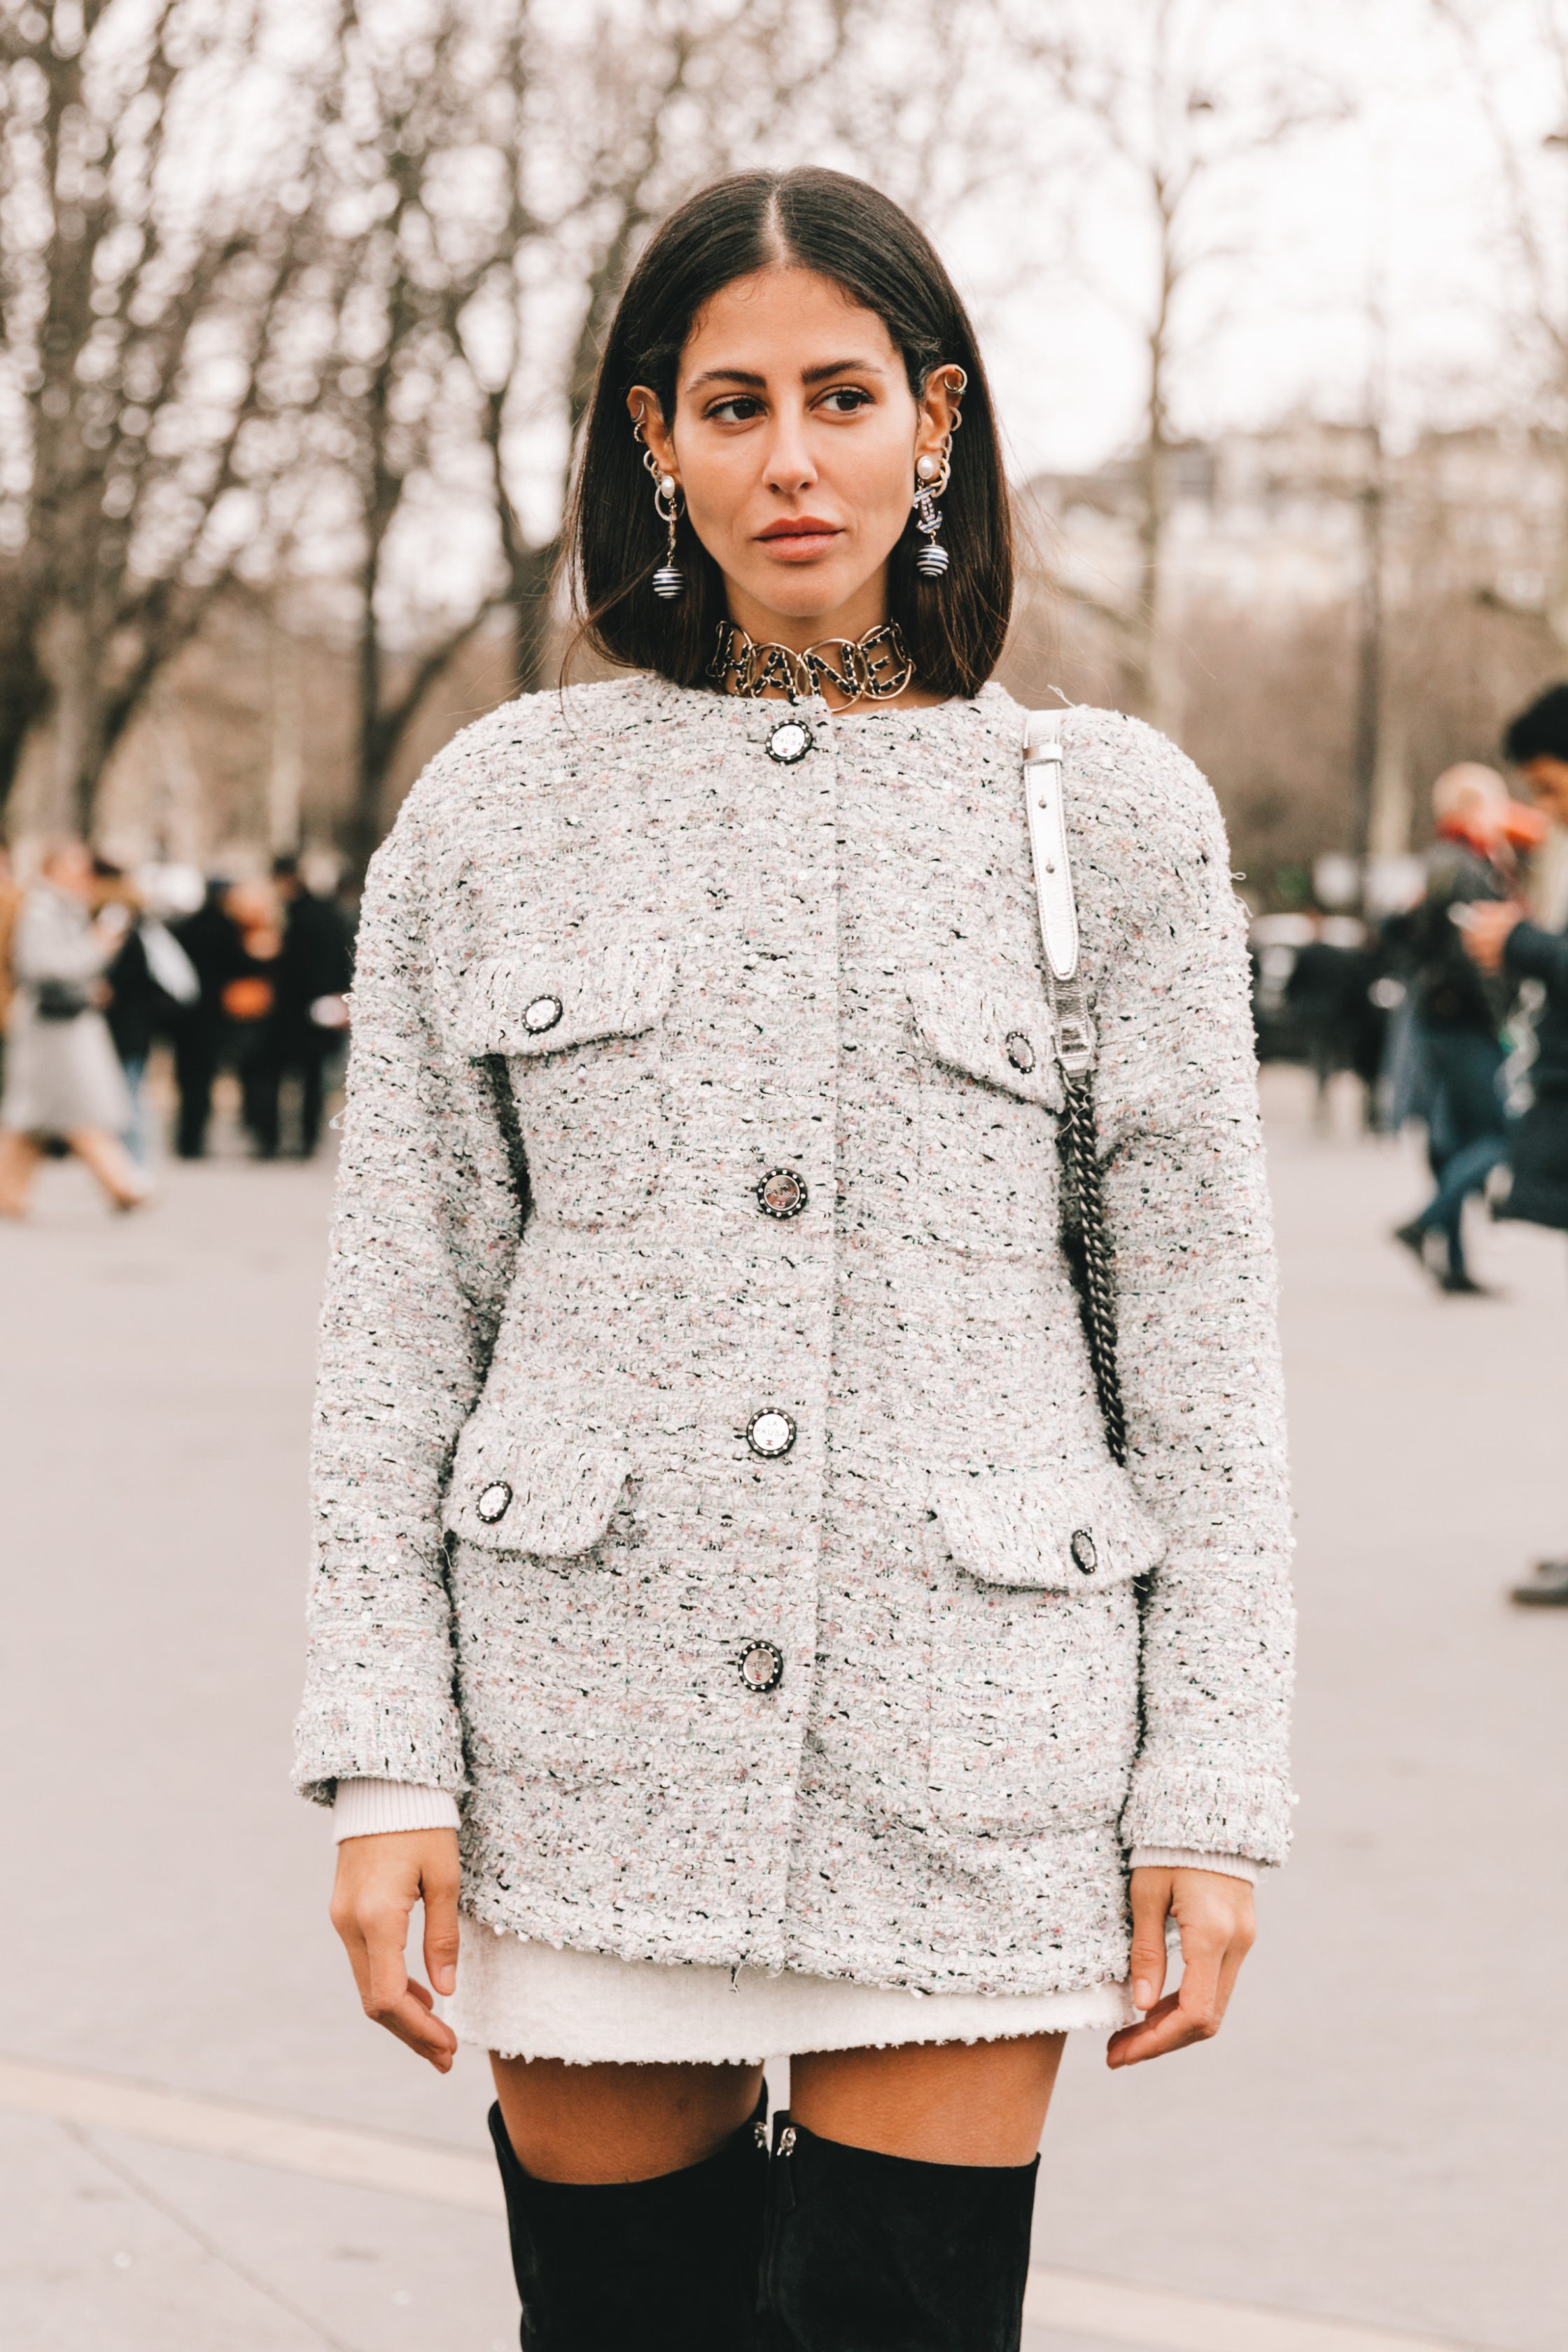 Chanel Street Style Paris Fashion Week Fall Winter by Collage Vintage